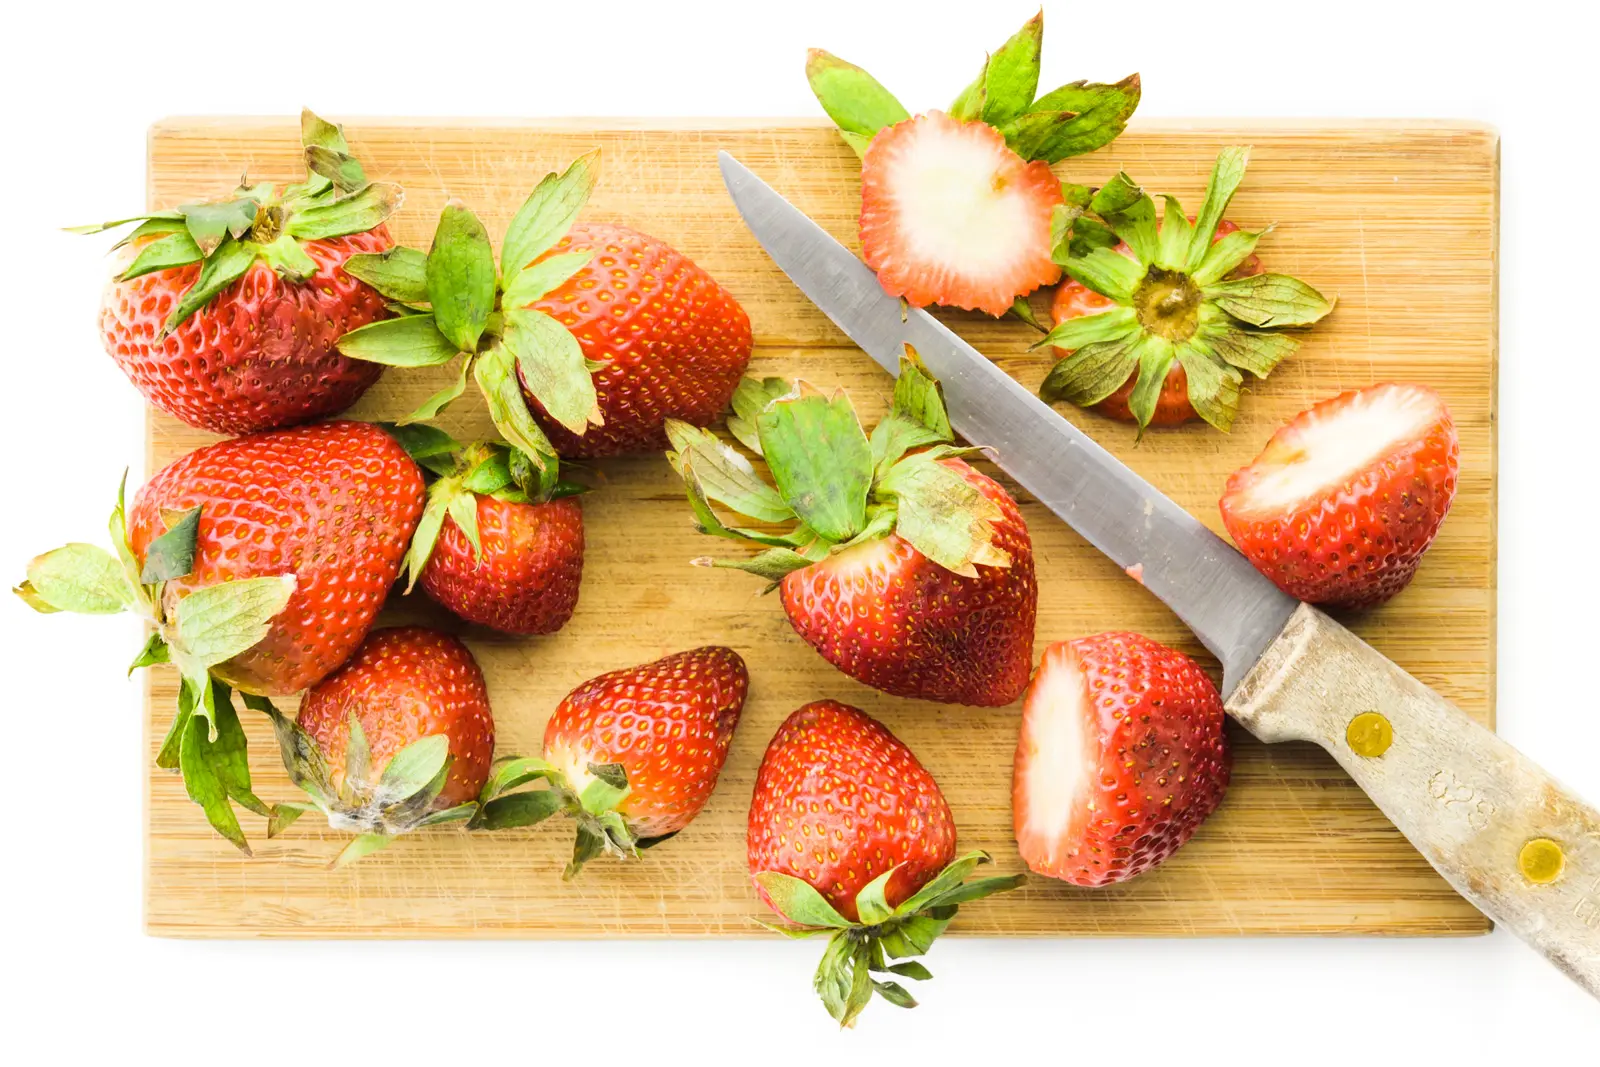 A cutting board has several sliced strawberries, sitting next to a knife.